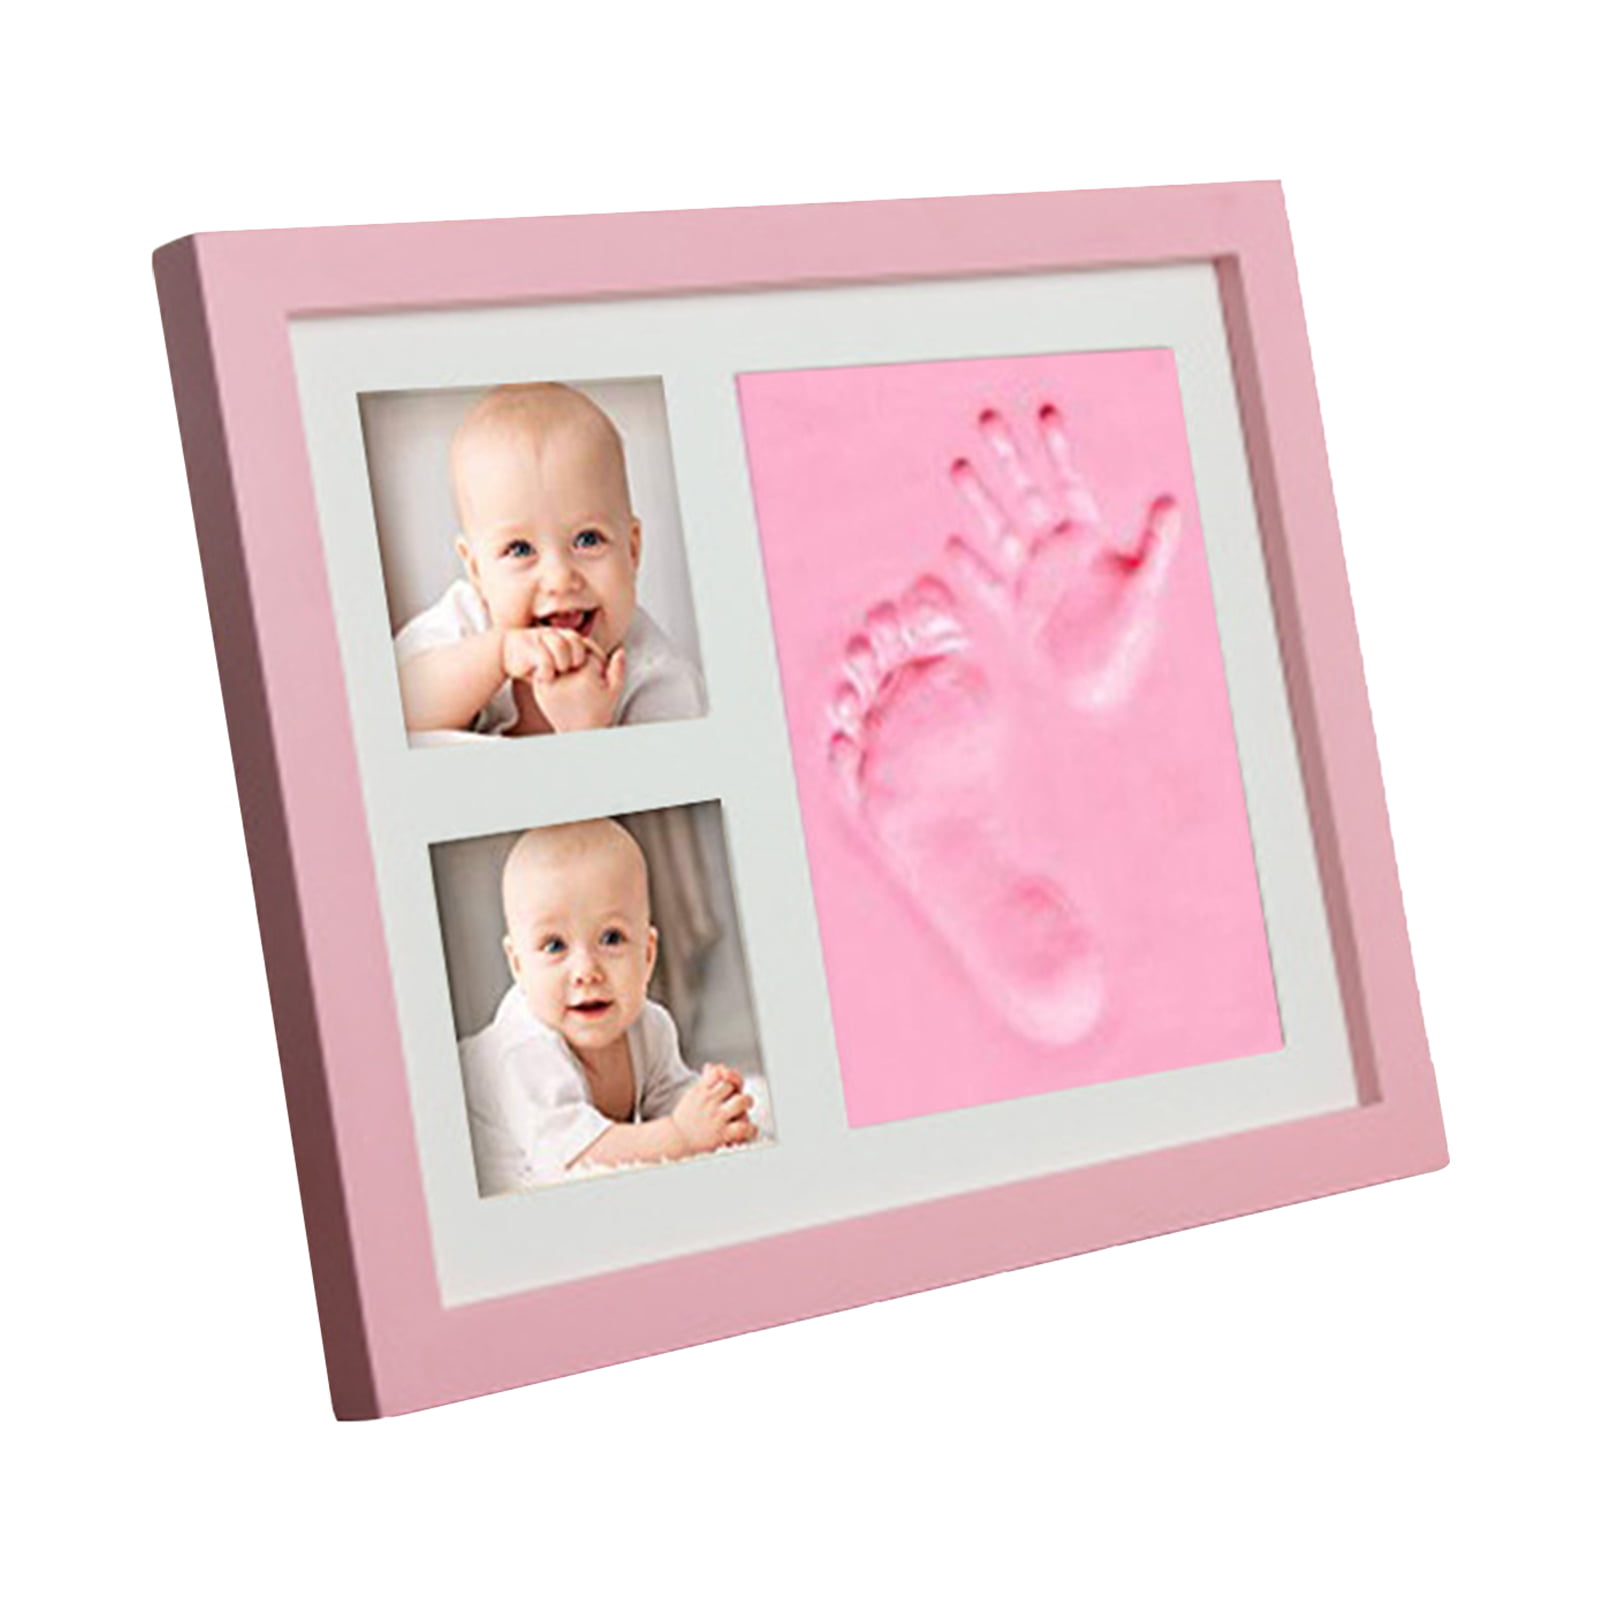 2 Pack Pink Picture Frames 3.5x5 inch Adorable Frames Perfect for Nursery 